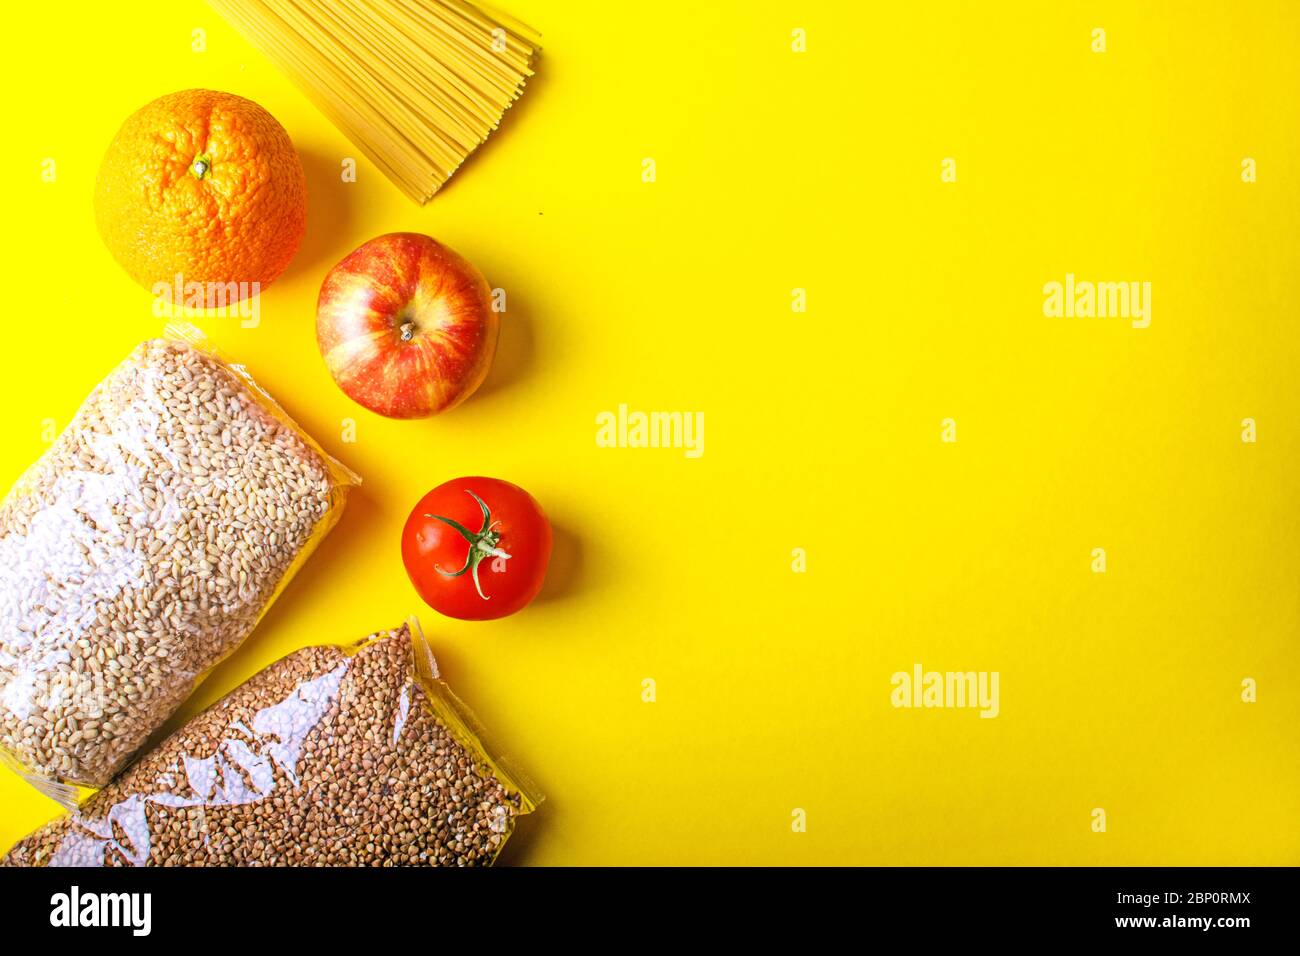 Food supplies for quarantine on yellow background. Pasta, vegetables, fruits, cereals. Stock Photo